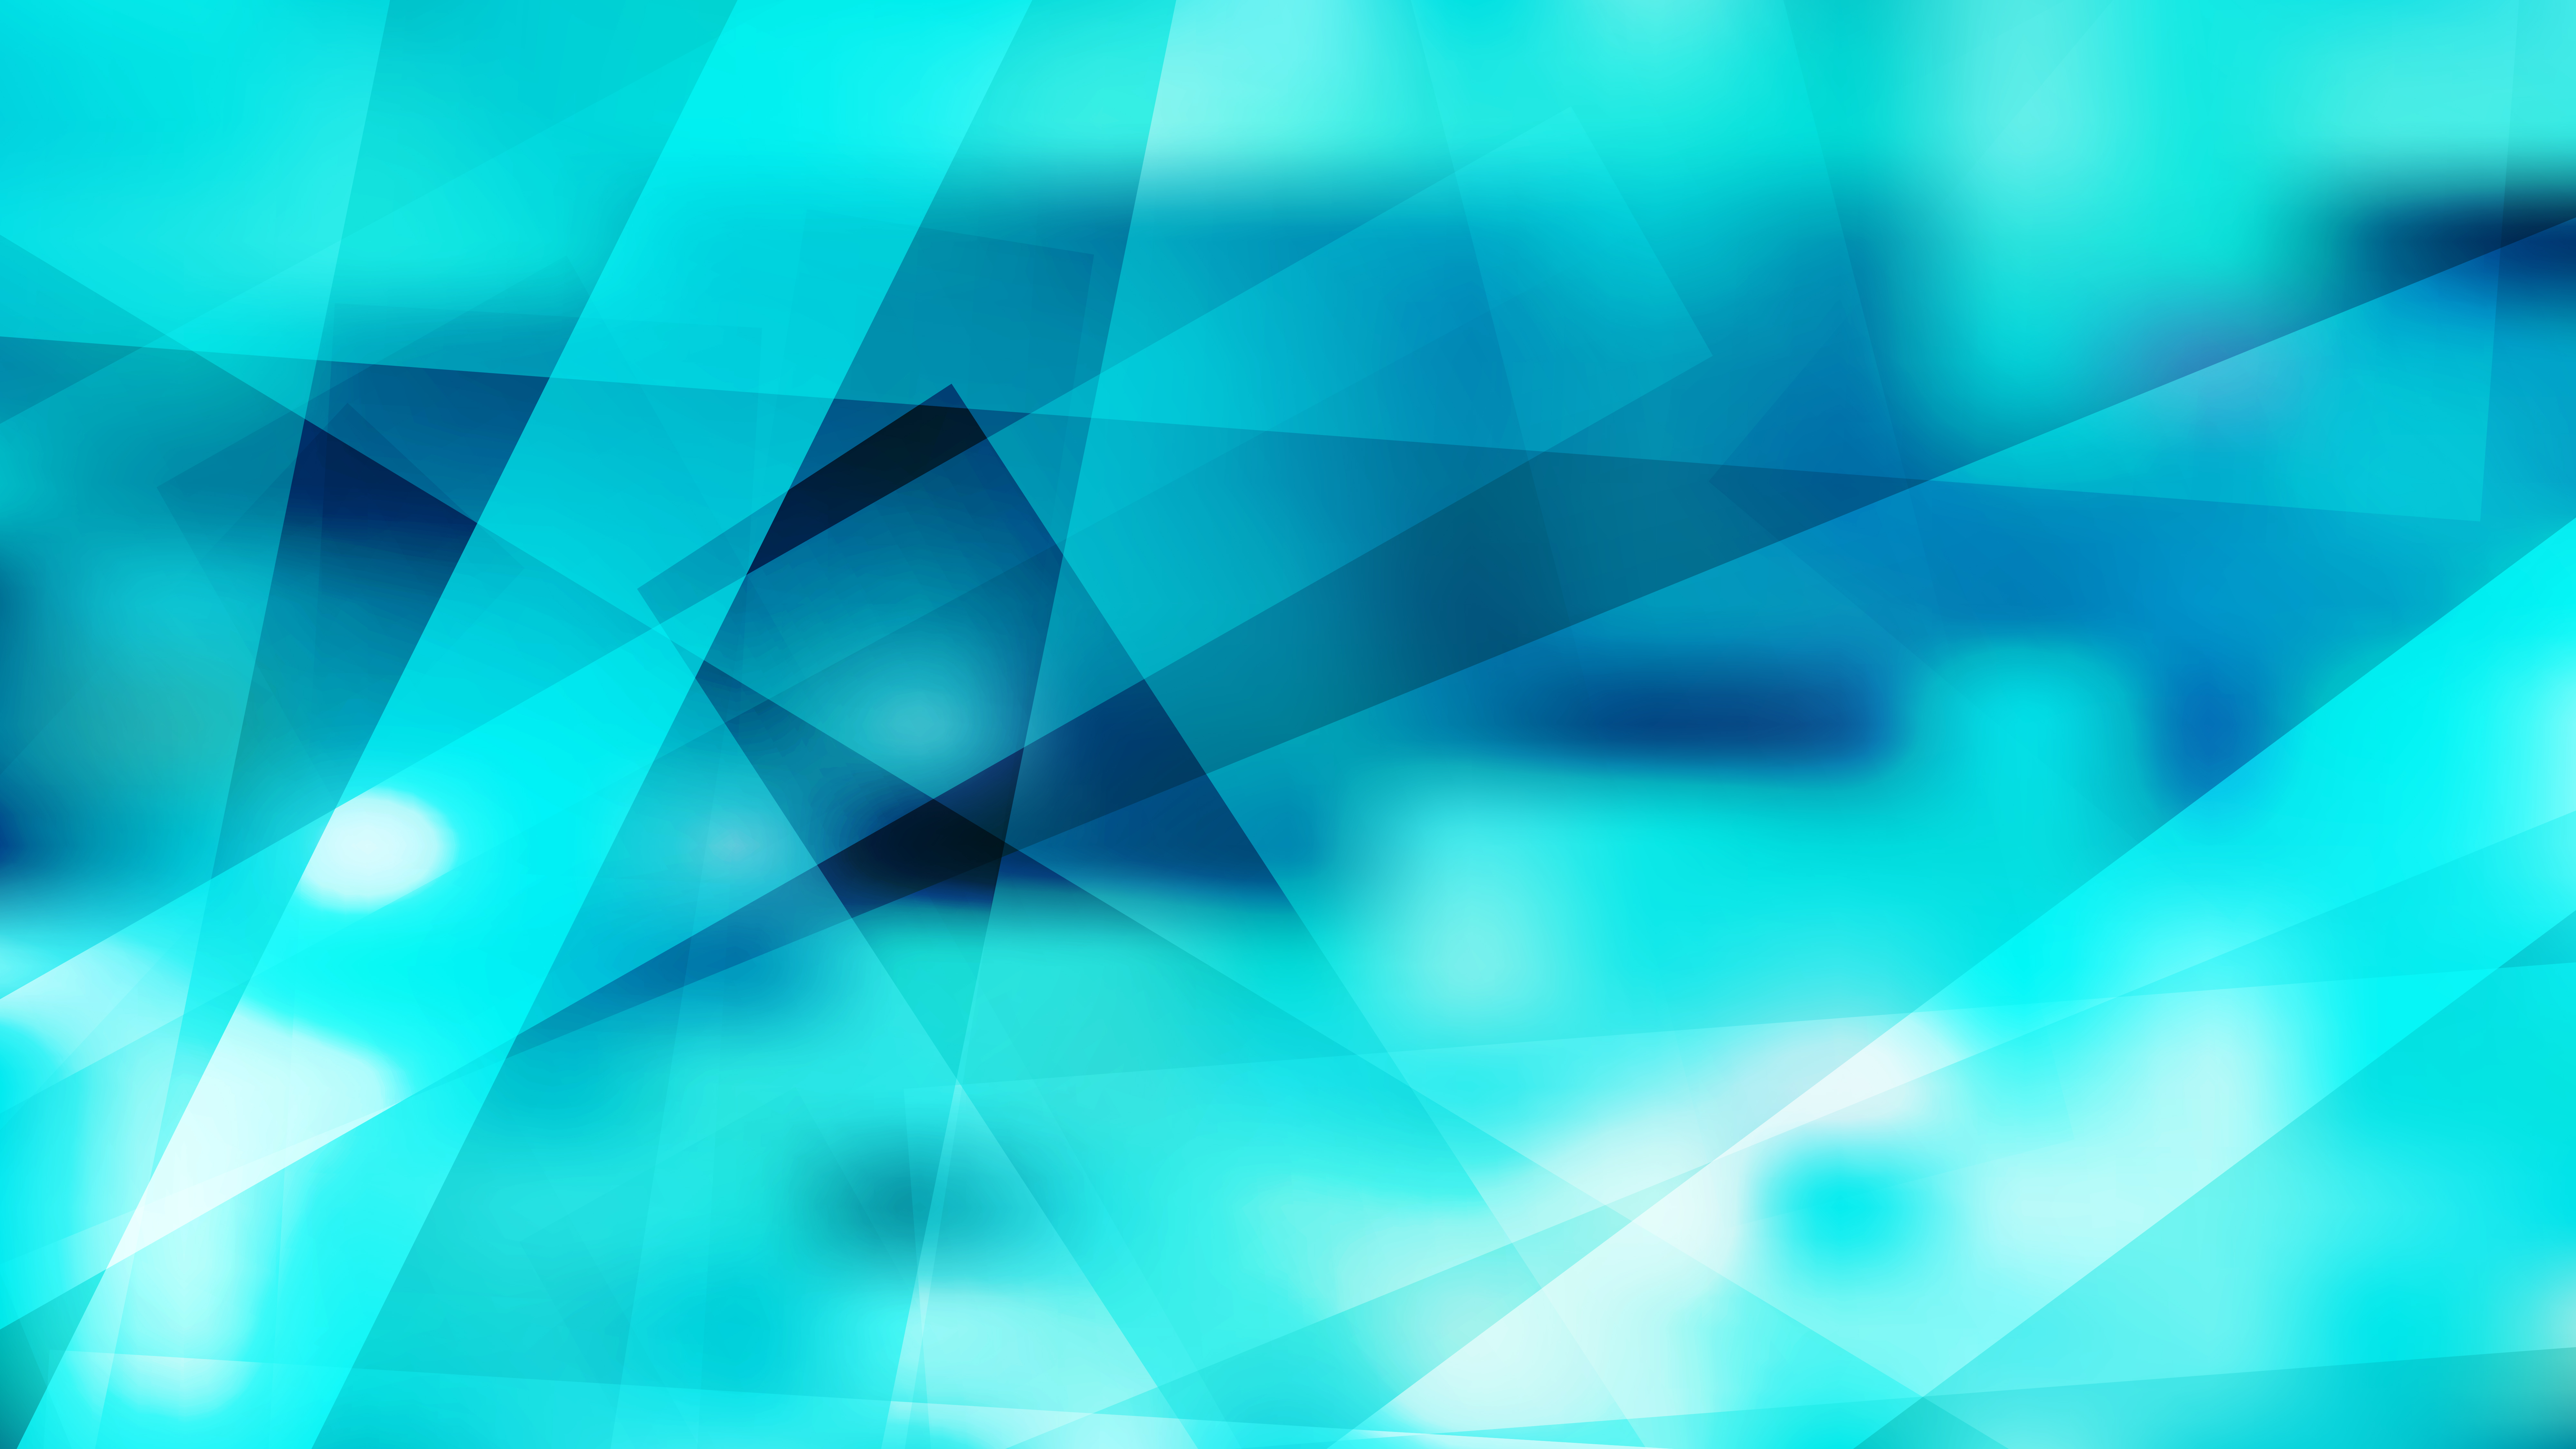 Free Geometric Abstract Turquoise Background